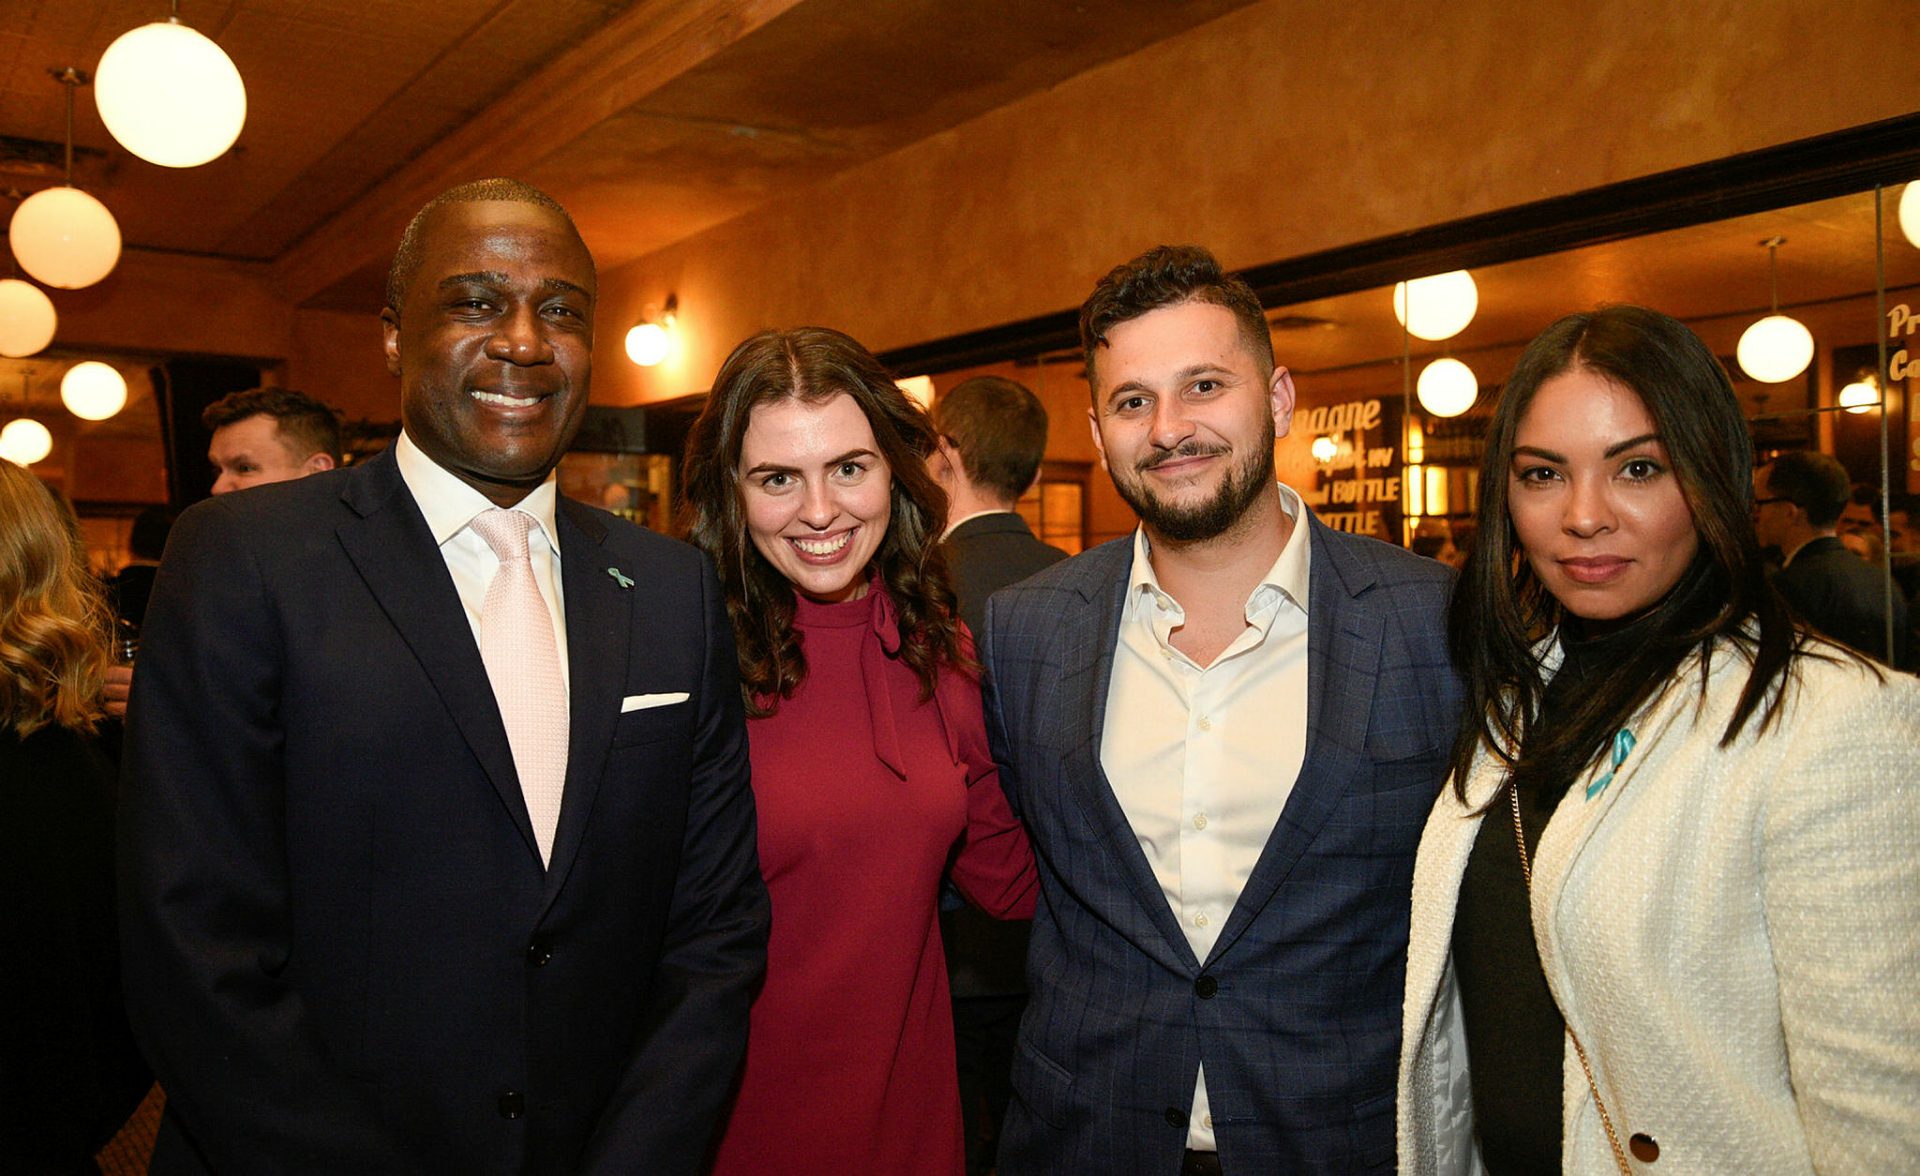 Organizer George Wamala, director of regulatory and government affairs at RBC, left; Brooklyn Mattison, senior advisor at RBC, Anthony Koch, strategist; and Anaida Poilievre, wife of Conservative Party leader Pierre Poilievre at 'The Dance for Her' Ovarian Cancer Fundraiser at Métropolitain Brasserie on January 16, 2023.